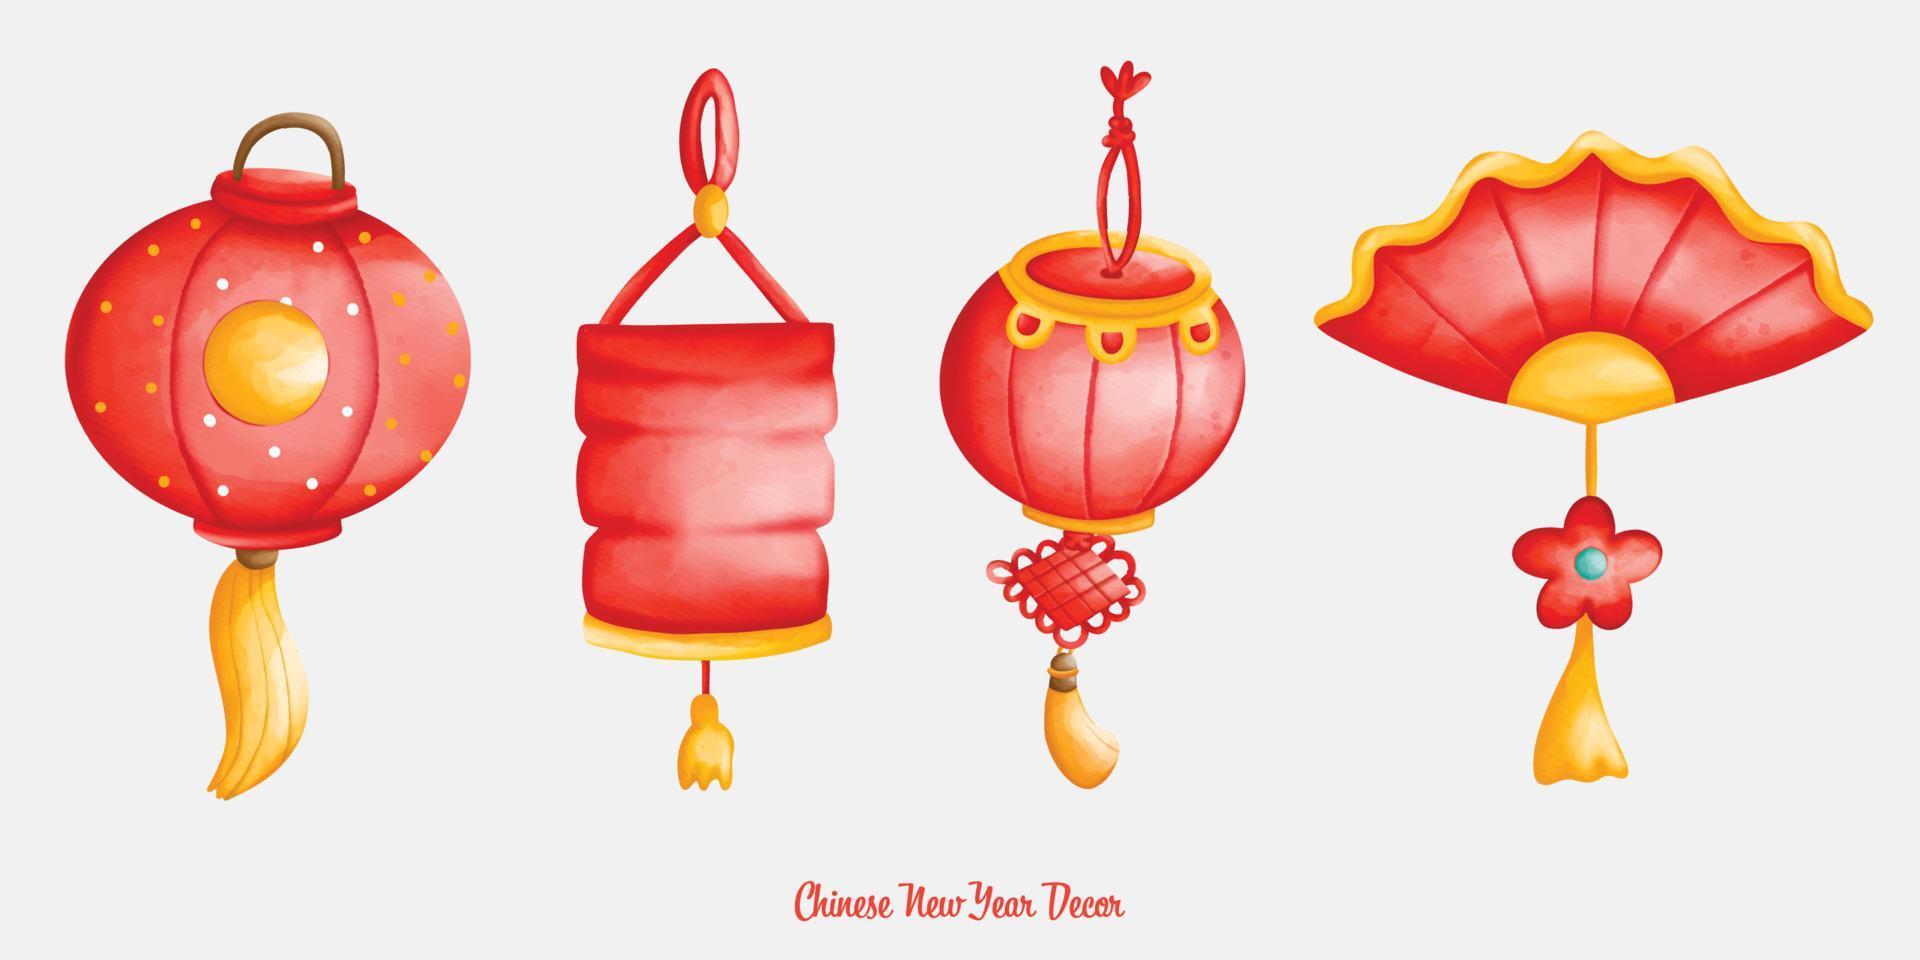 Hand drawn red Chinese paper lanterns, Chinese New Year element vector